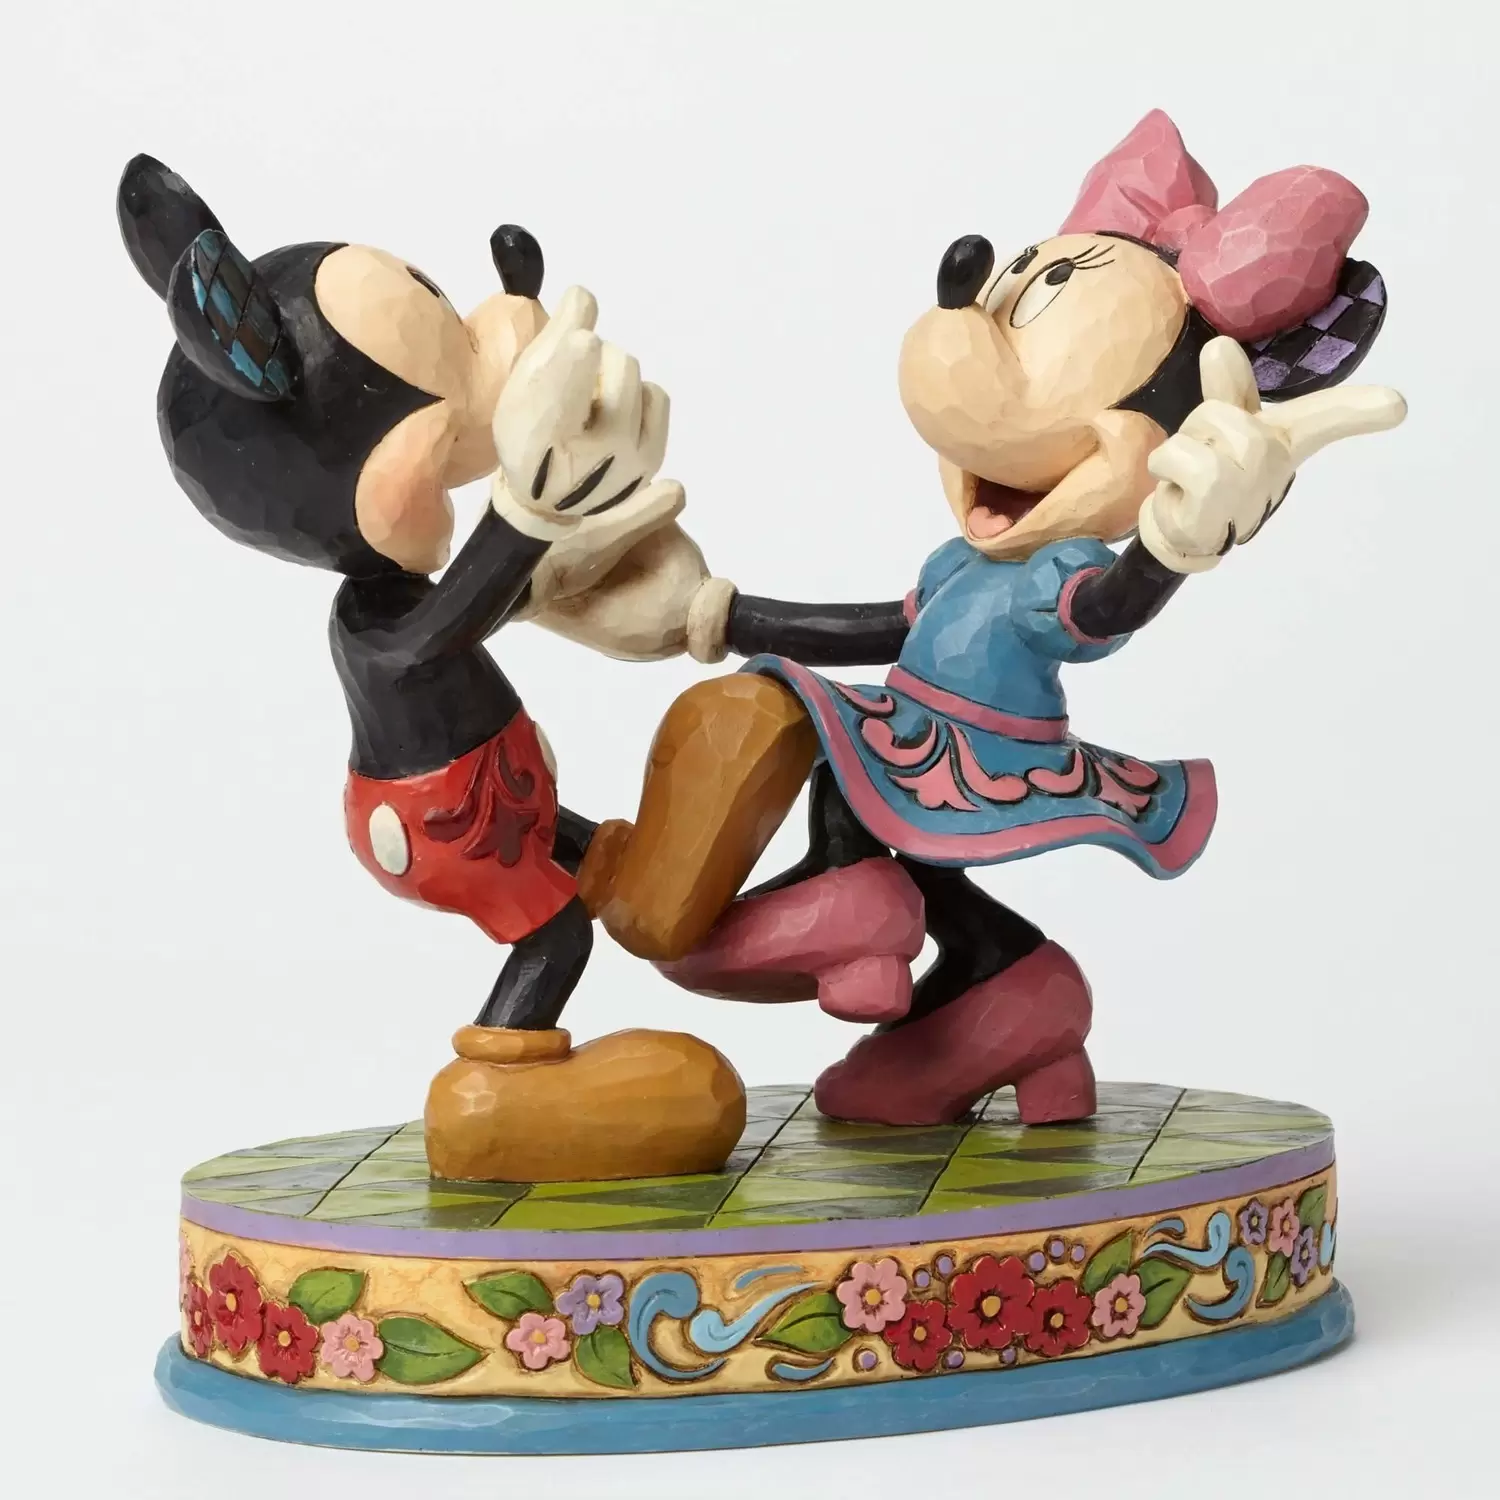 Disney Traditions by Jim Shore - Swinging Sweethearts - Mickey and Minnie Dancing